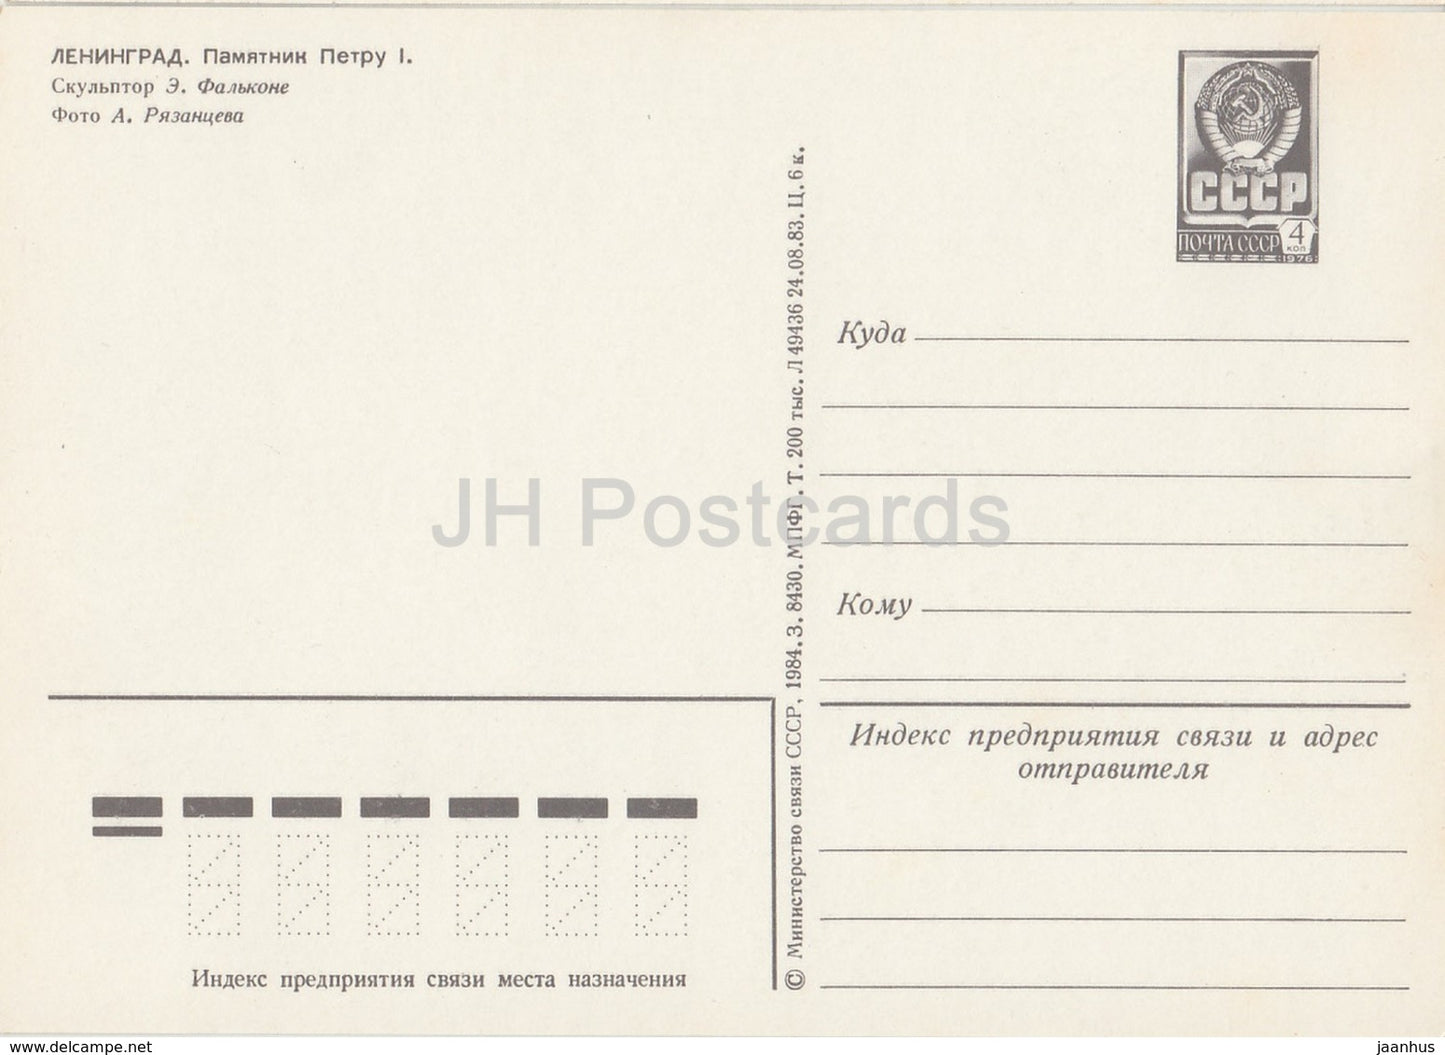 Leningrad - St. Petersburg - monument to Peter The Great - postal stationery - 1984 - Russia USSR - unused